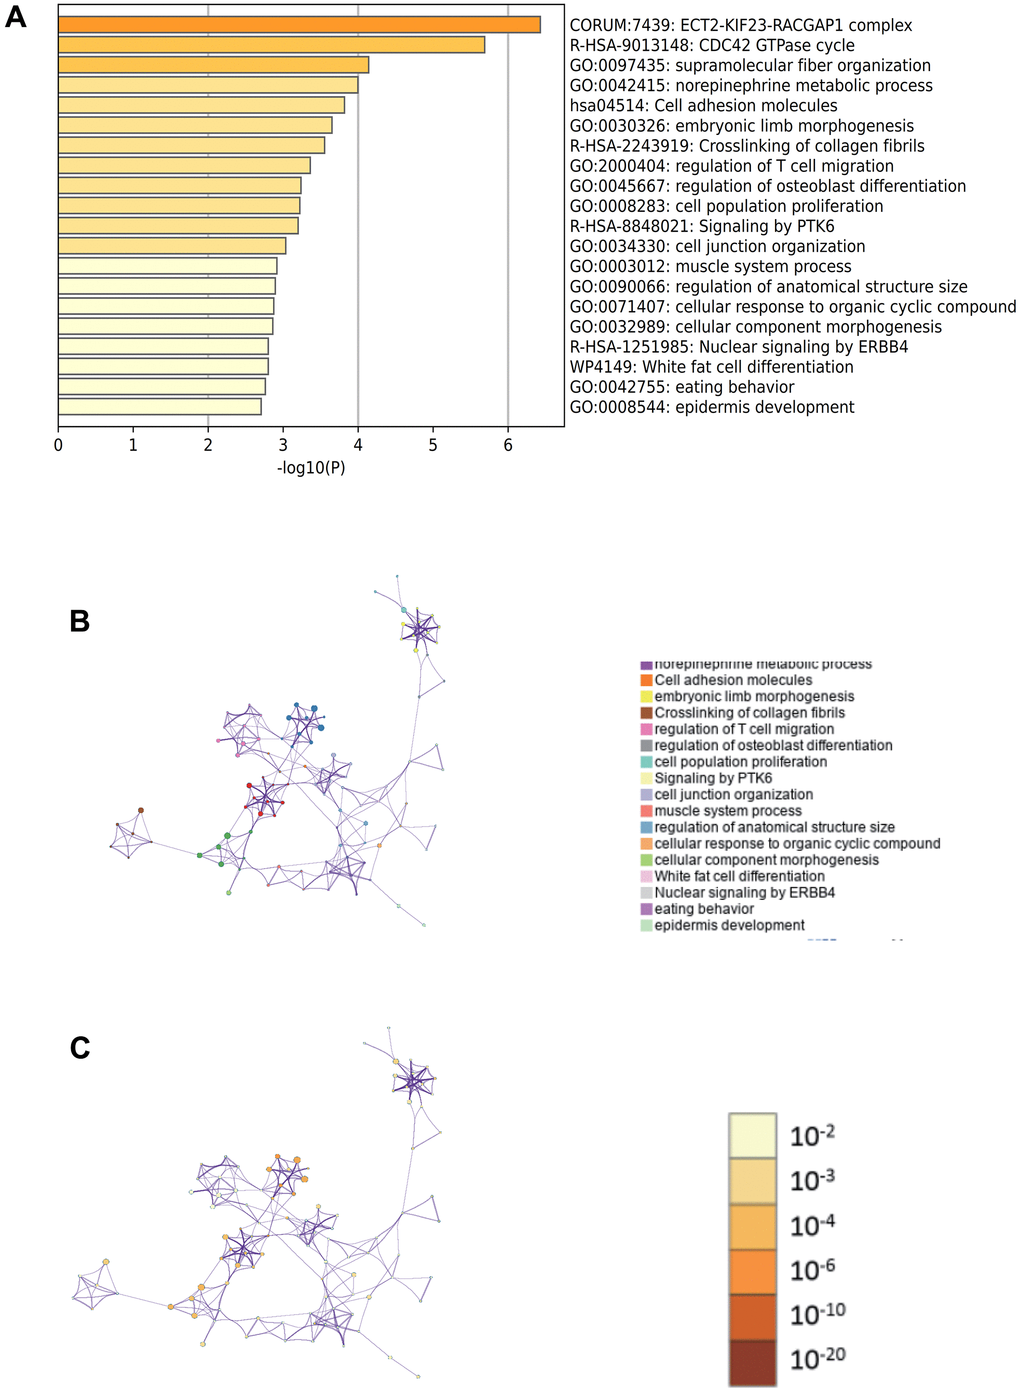 Metascape enrichment analysis. (A) GO has the regulation of supramolecular fibrous tissue, norepinephrine metabolism and T cell migration. (B) Enrichment networks colored by enrichment terms. (C) Enrichment networks colored by p values.